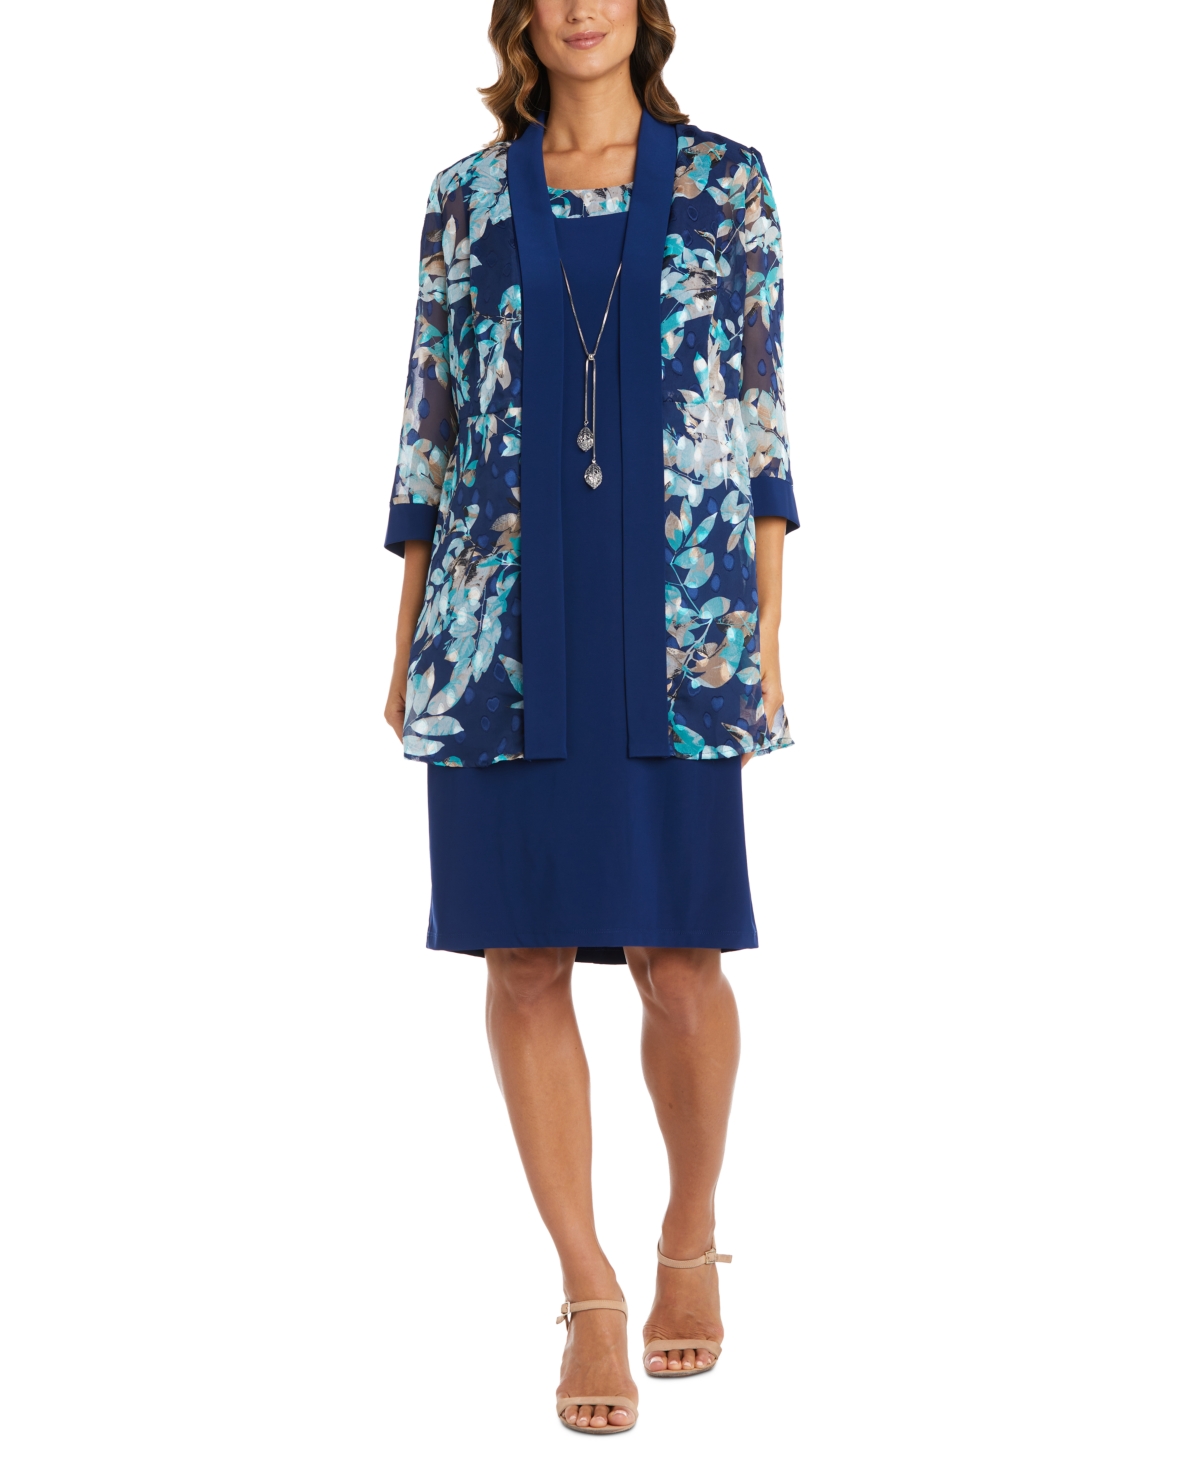 R & M Richards Women's 2-pc. Printed Jacquard Jacket & Necklace Dress In Peacock